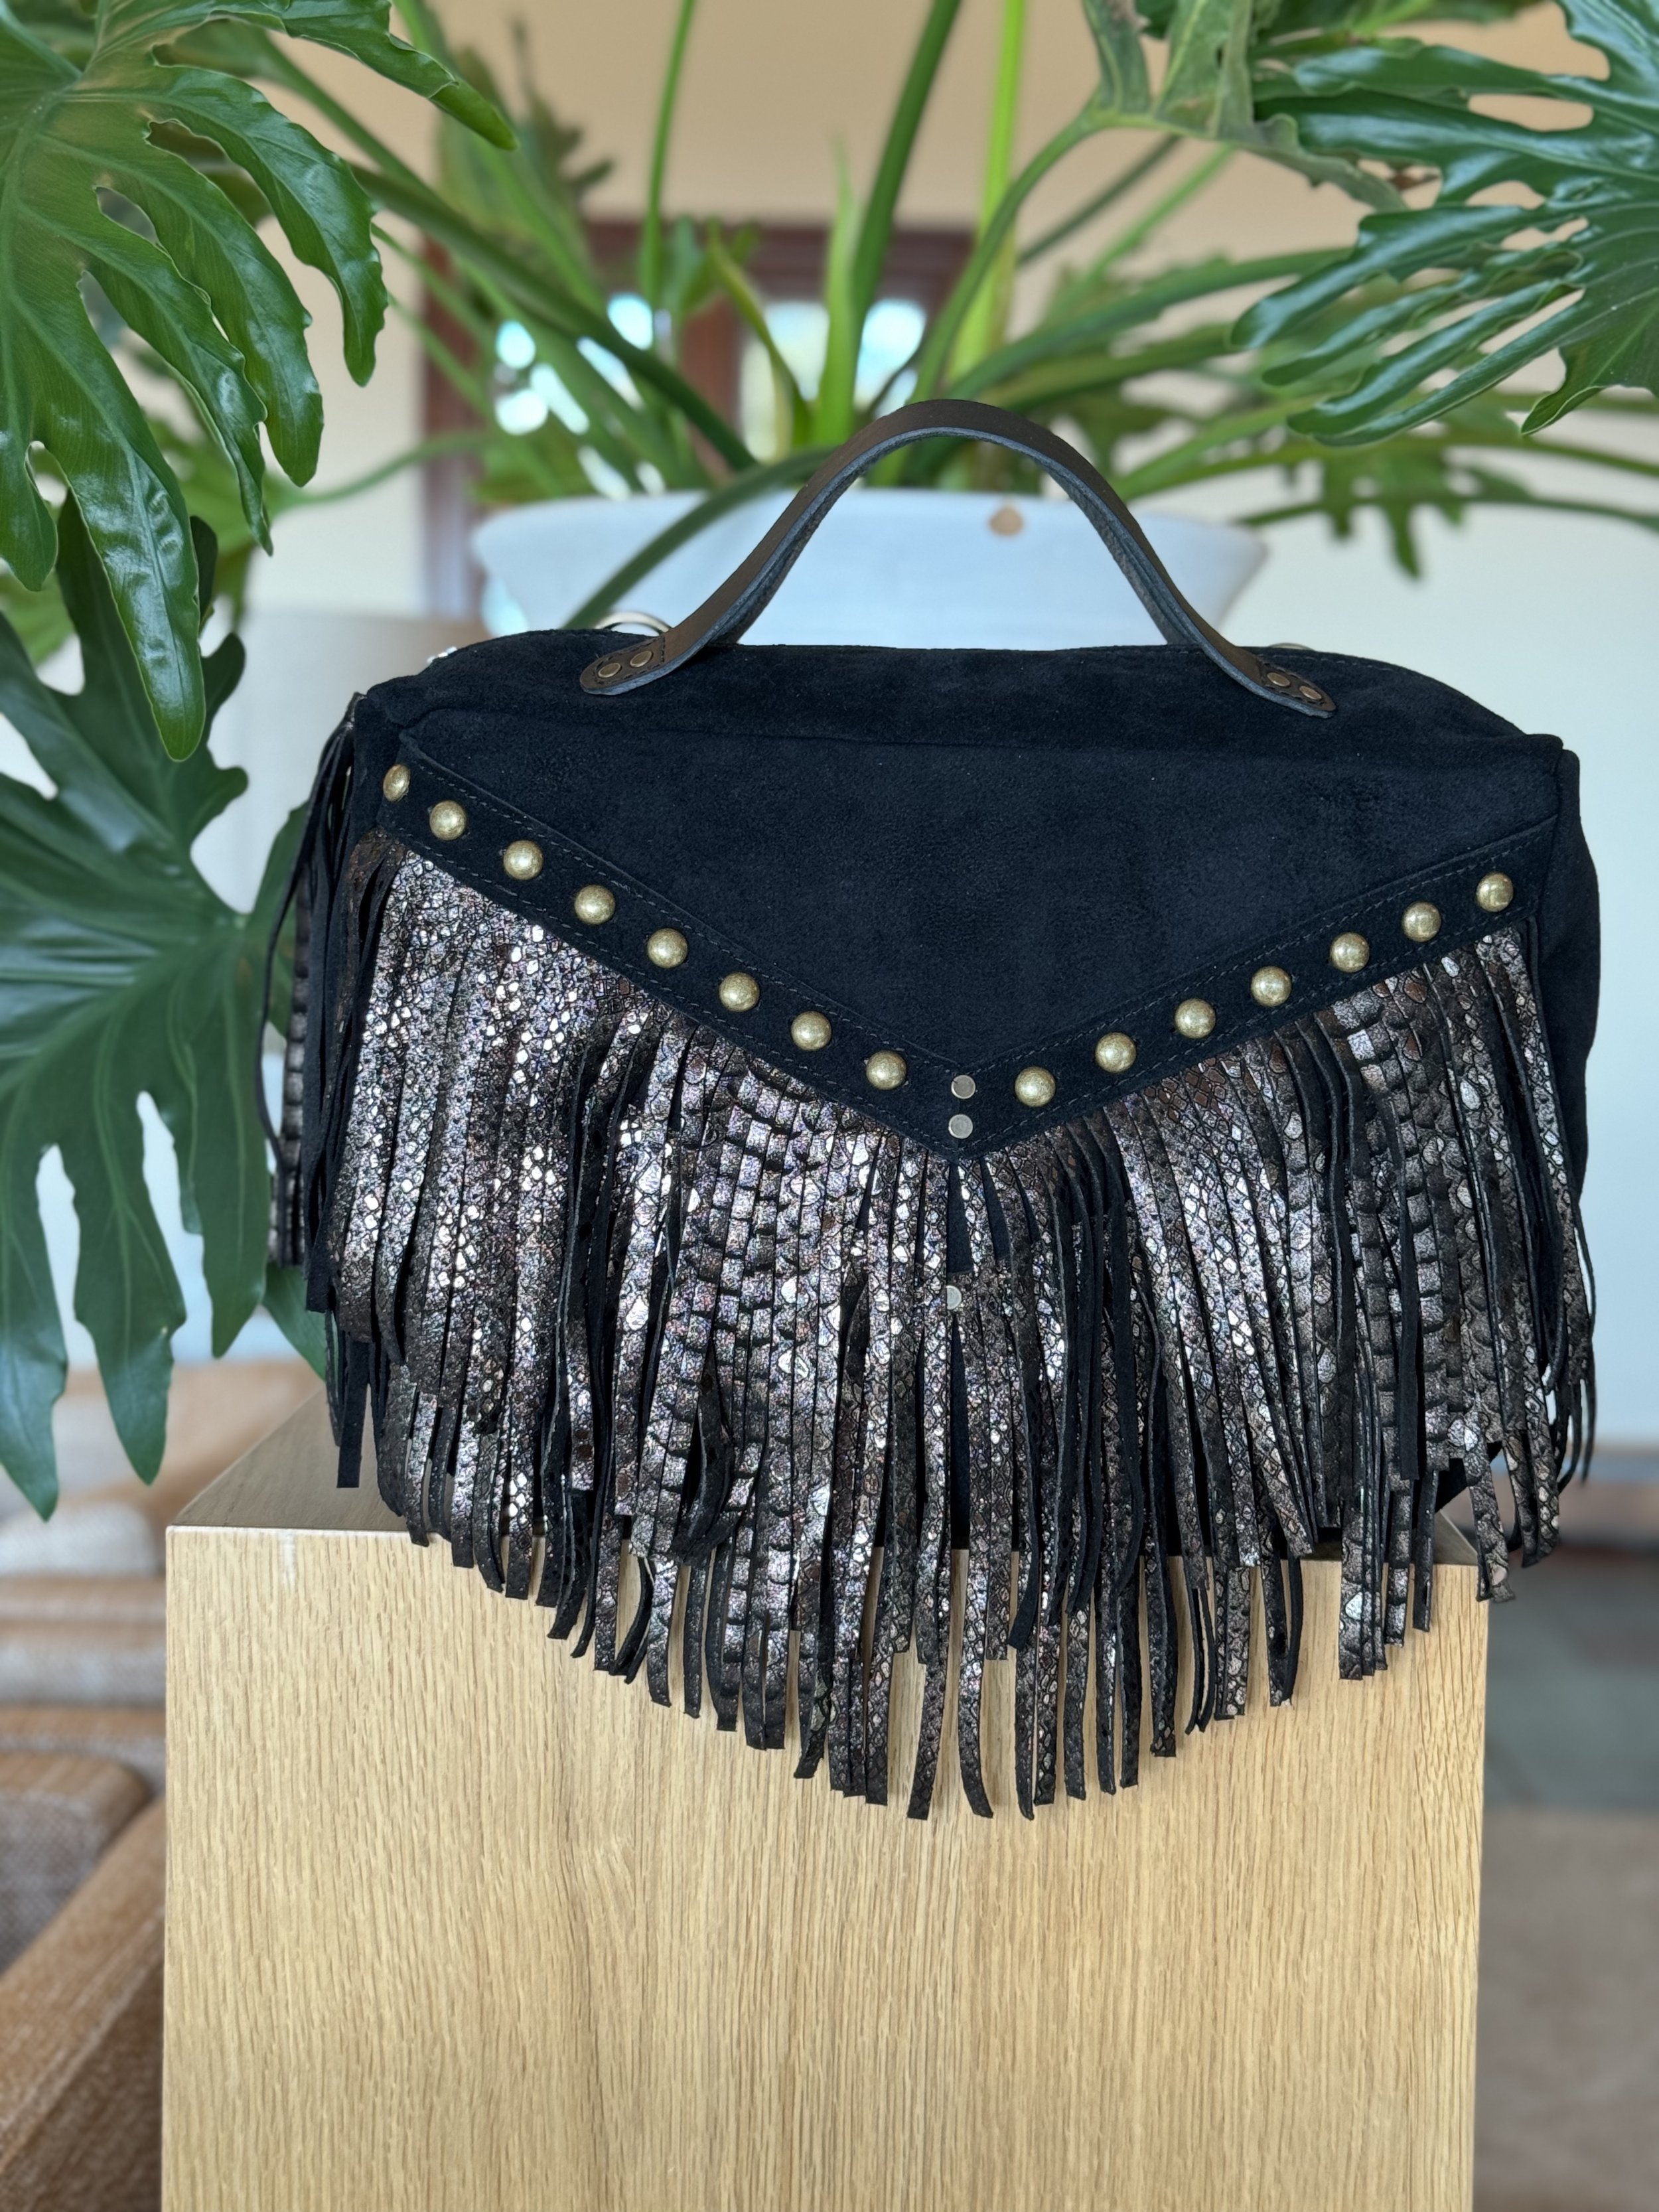 Black suede and Black Python fringe leather, Studs, 2 Simple Leather Handles, Antique Brass hardware, Flair D Ring - Melissa Convertible Bag